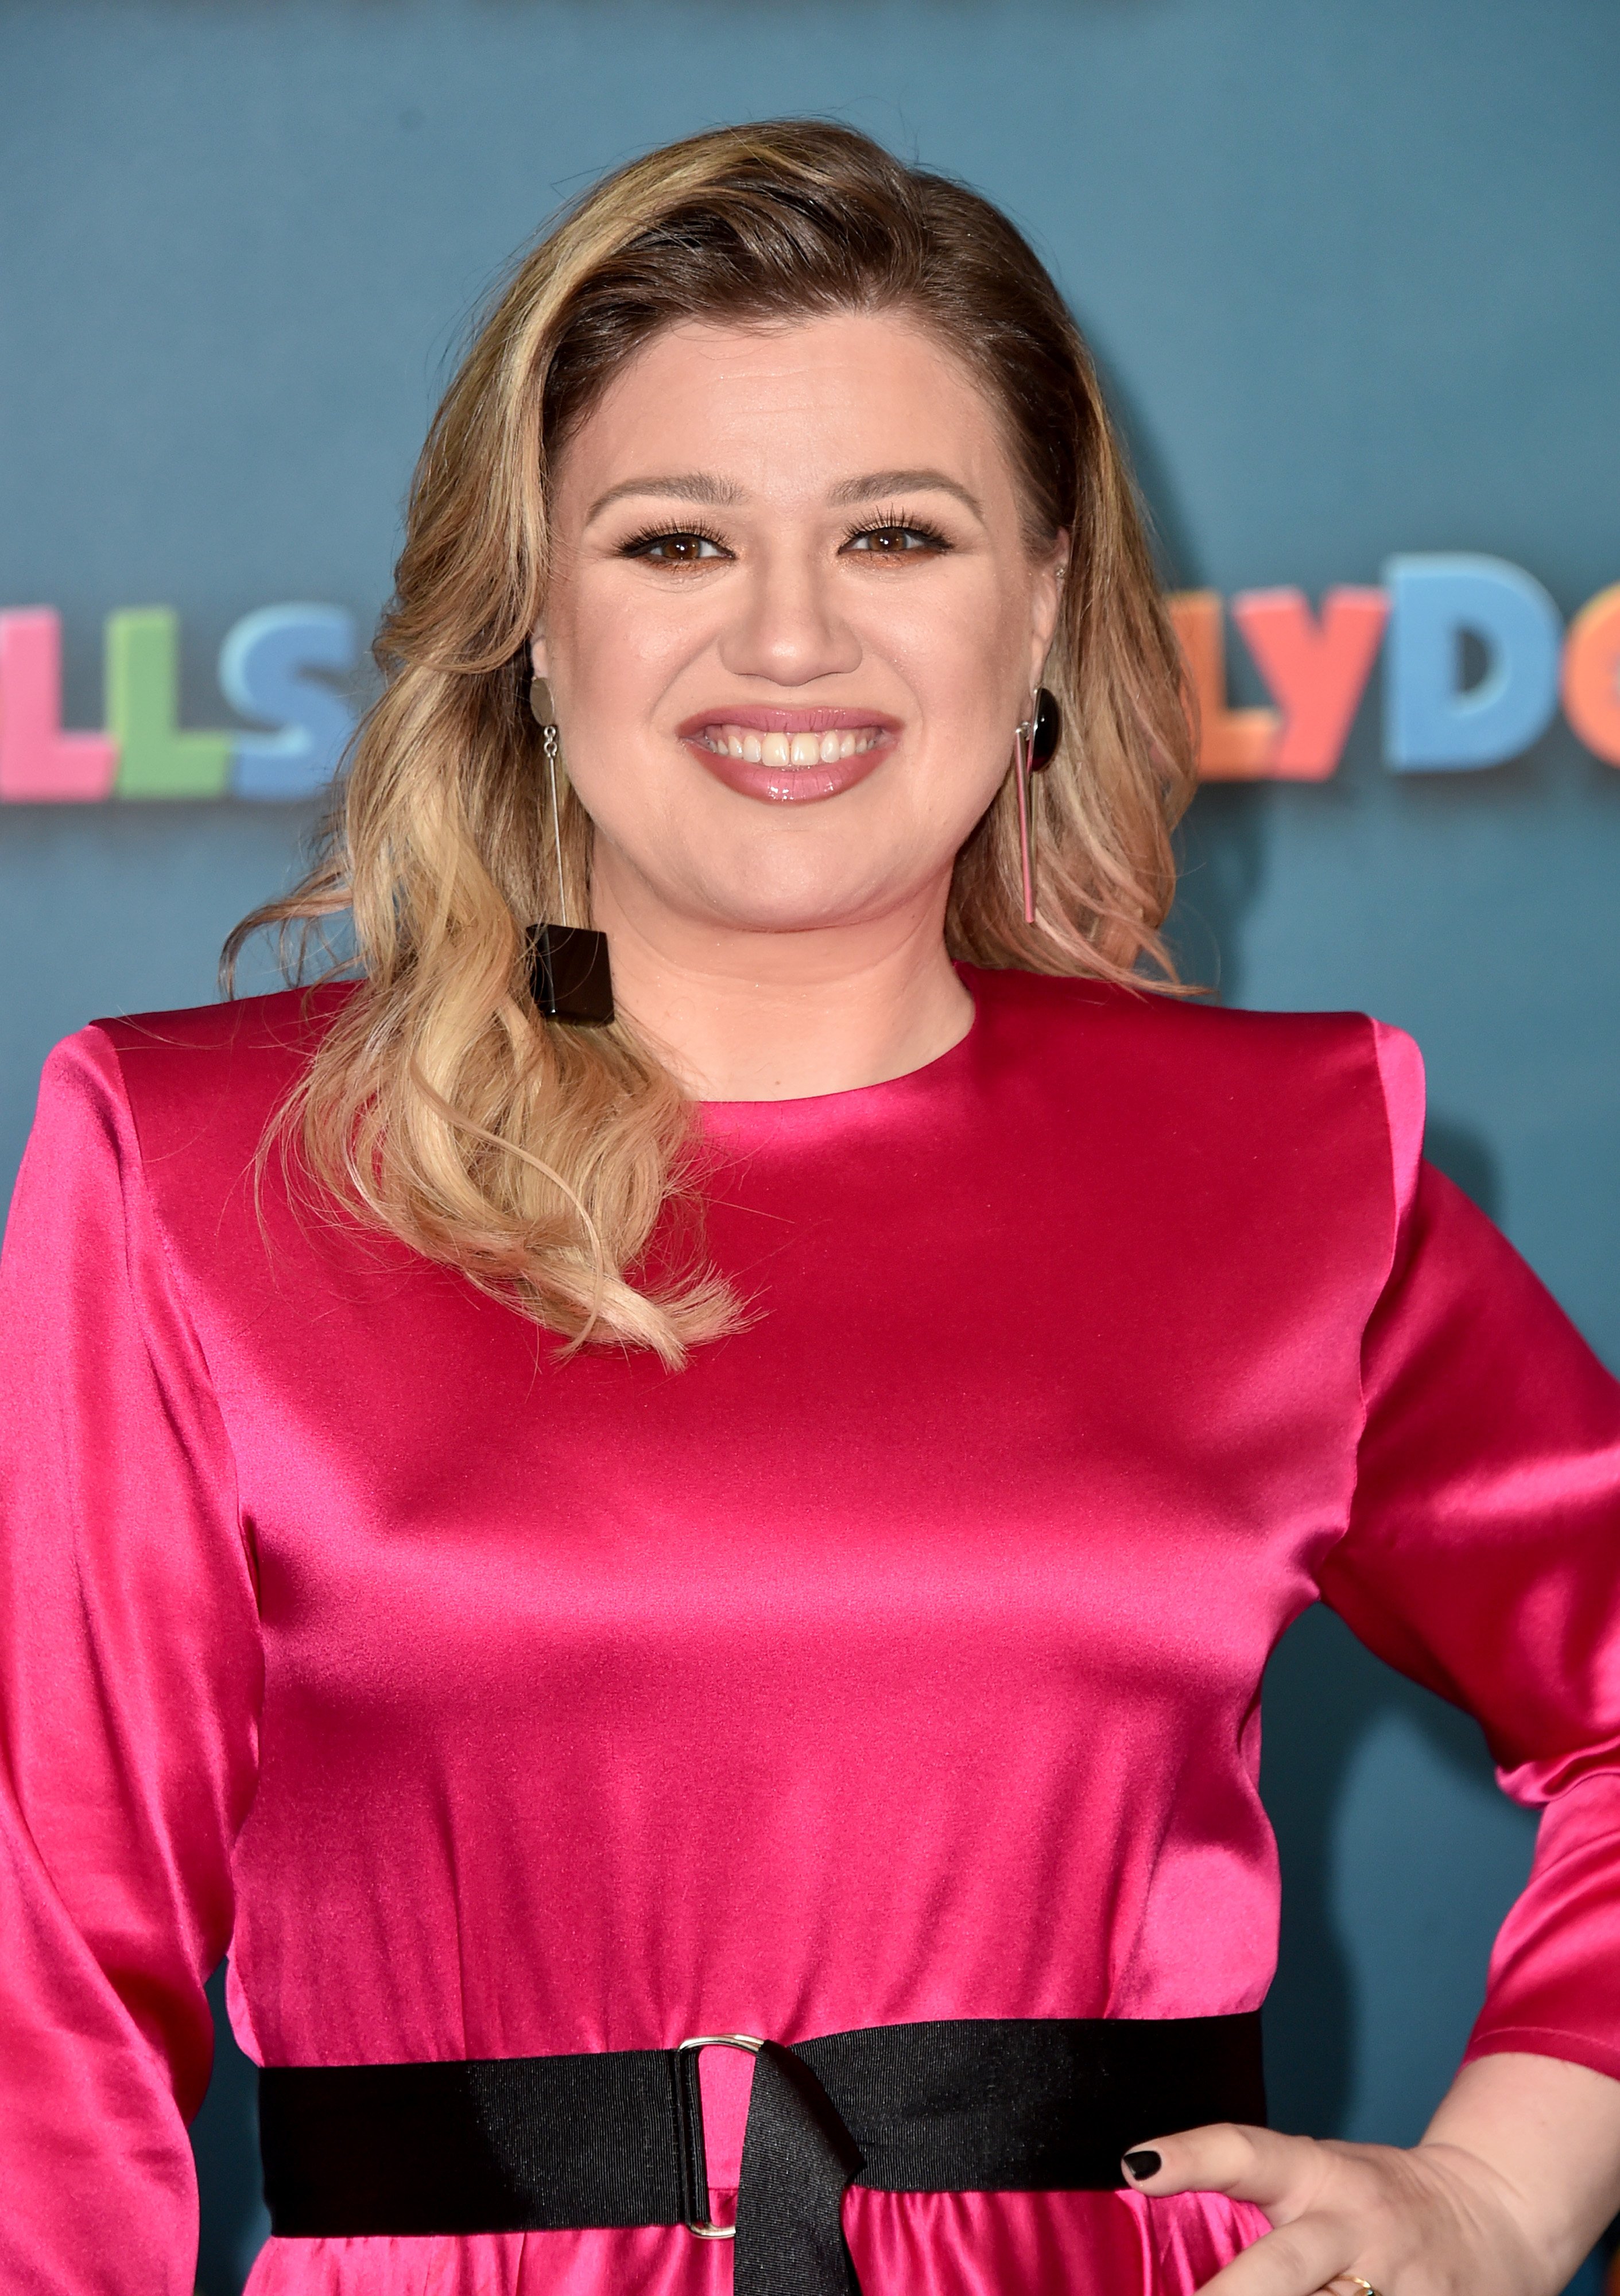 Kelly Clarkson attends "UglyDolls" photo call on April 13, 2019, in Beverly Hills, California. | Photo: Getty Images.